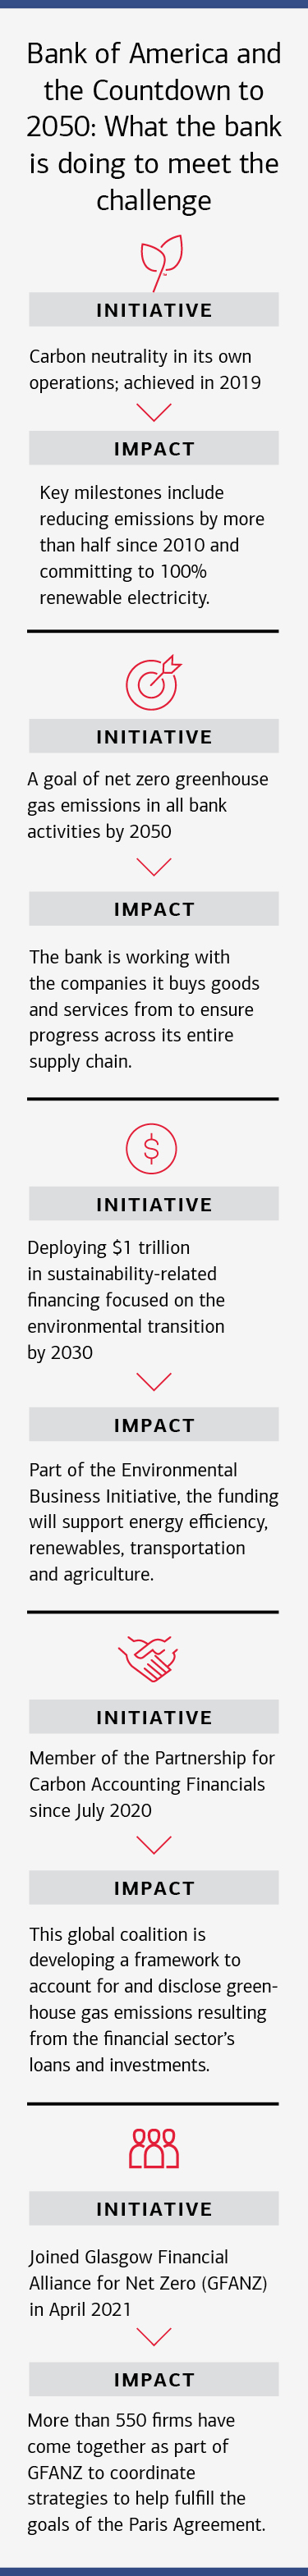 An overview of what Bank of America is doing to meet the challenge of net zero. See link below for a full description.